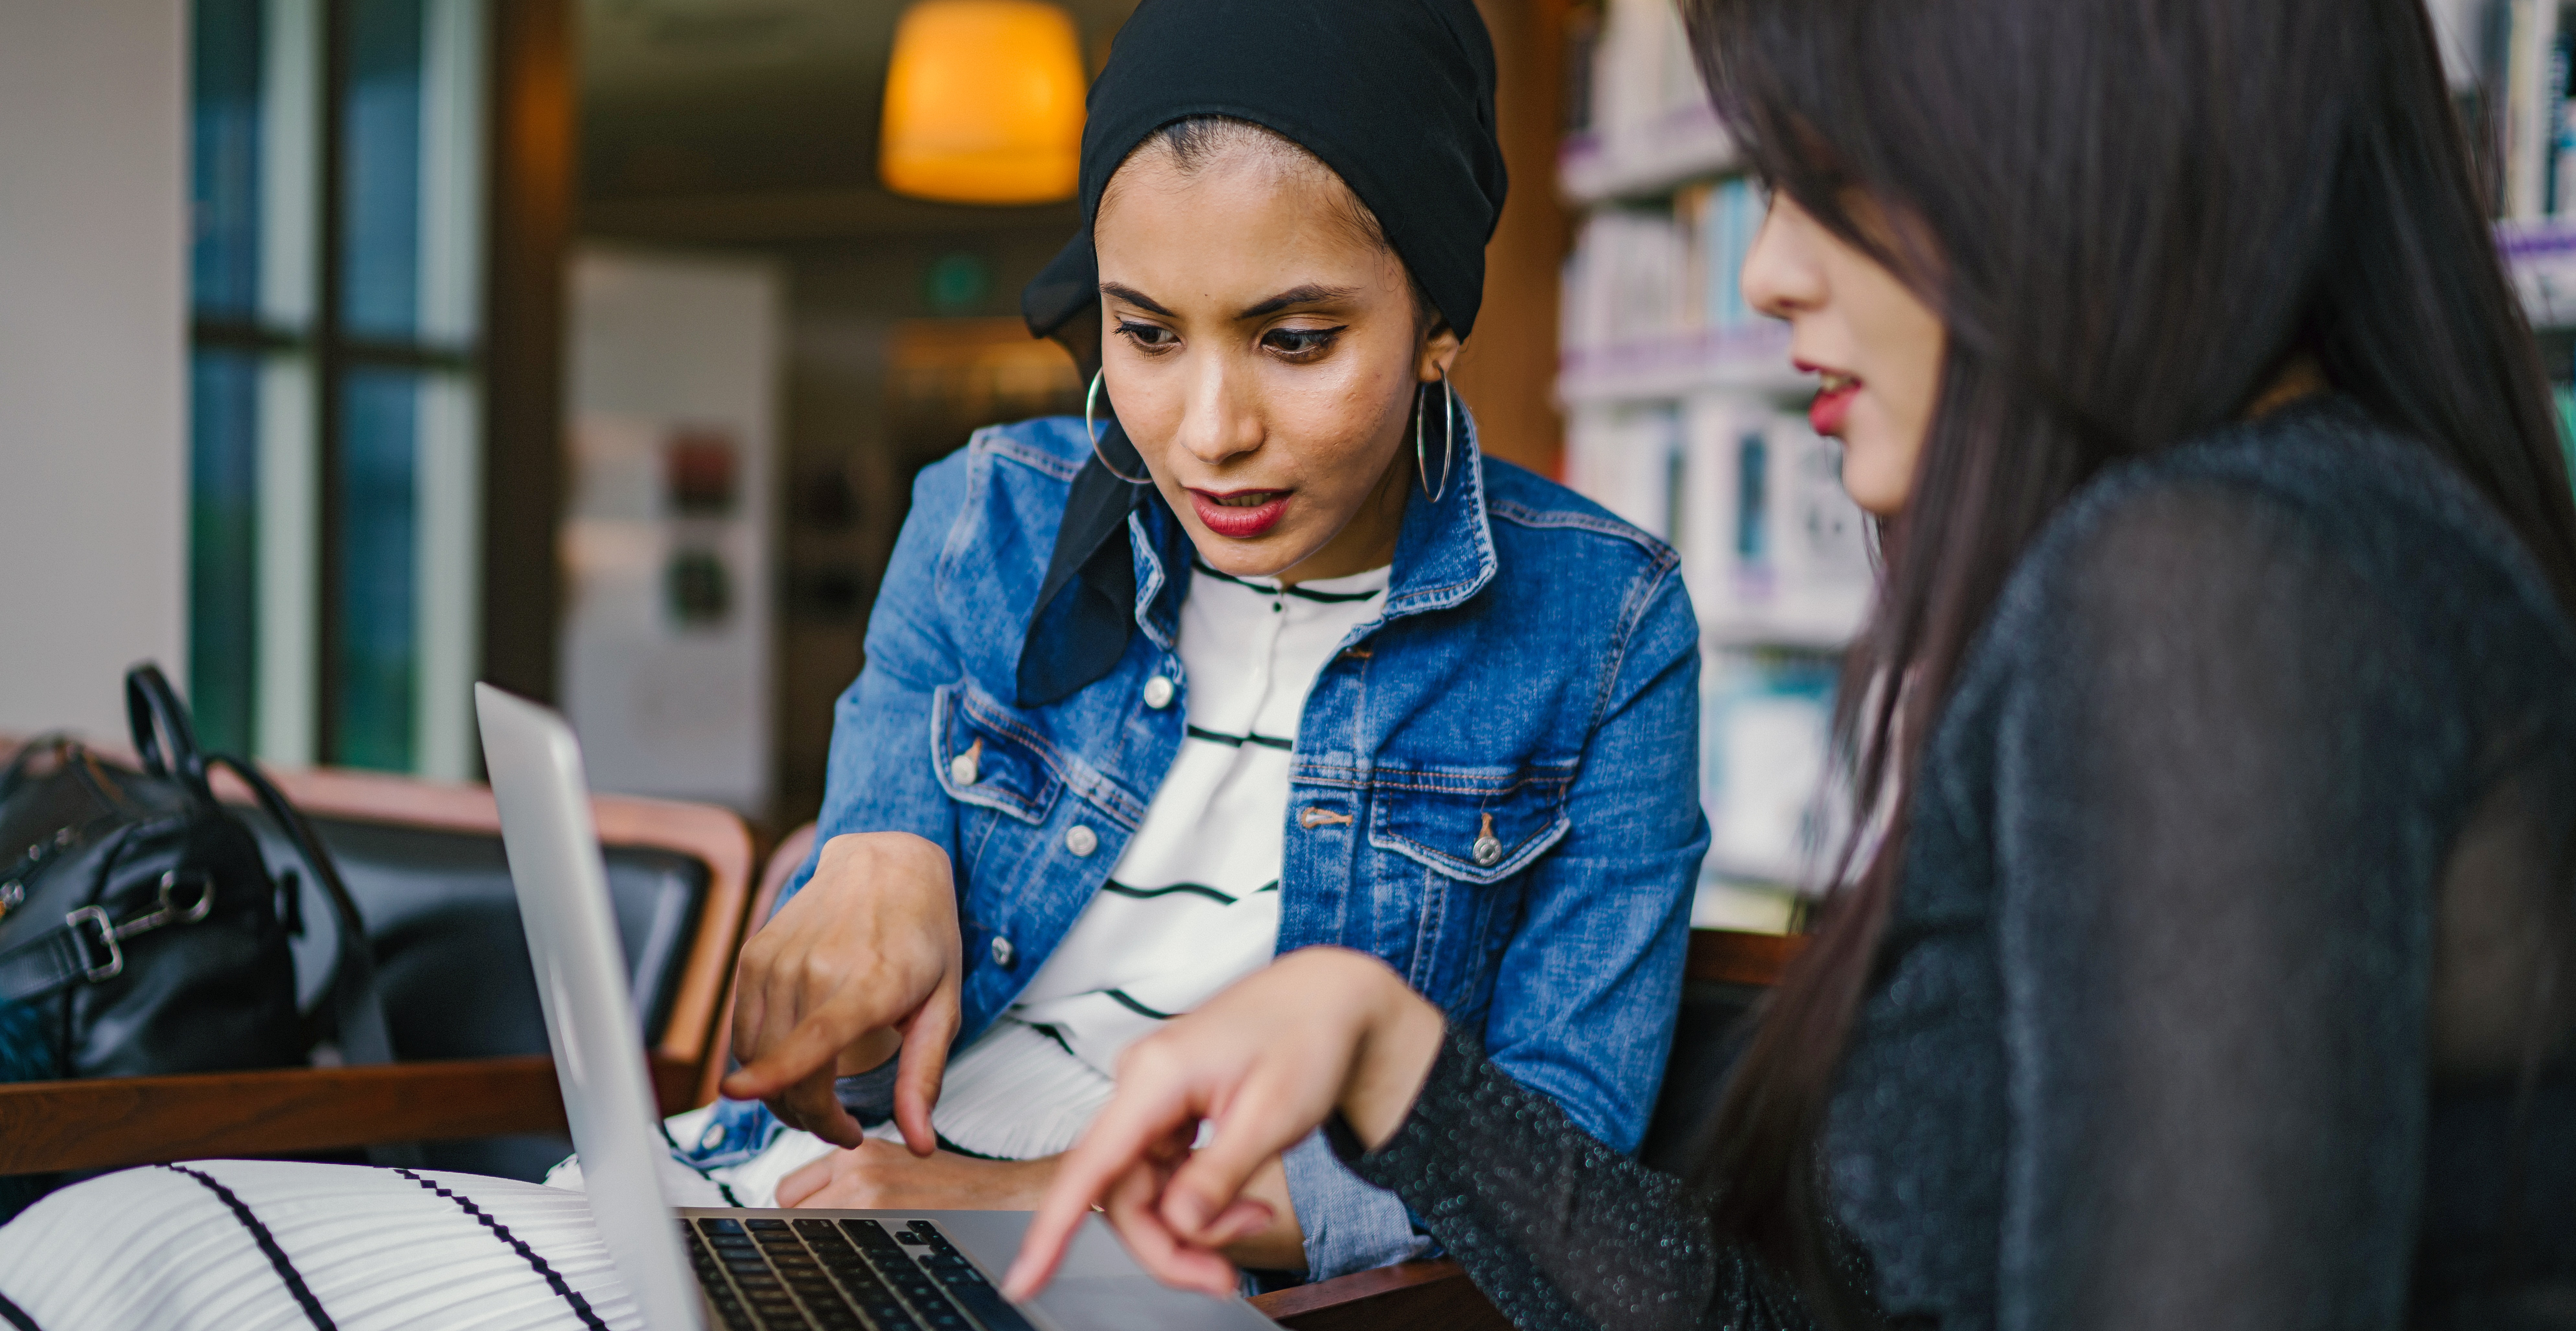 <p>Online learning enables you to attend degree programs anywhere in the world. Even so, the location of your master's degree program can make a difference.</p>